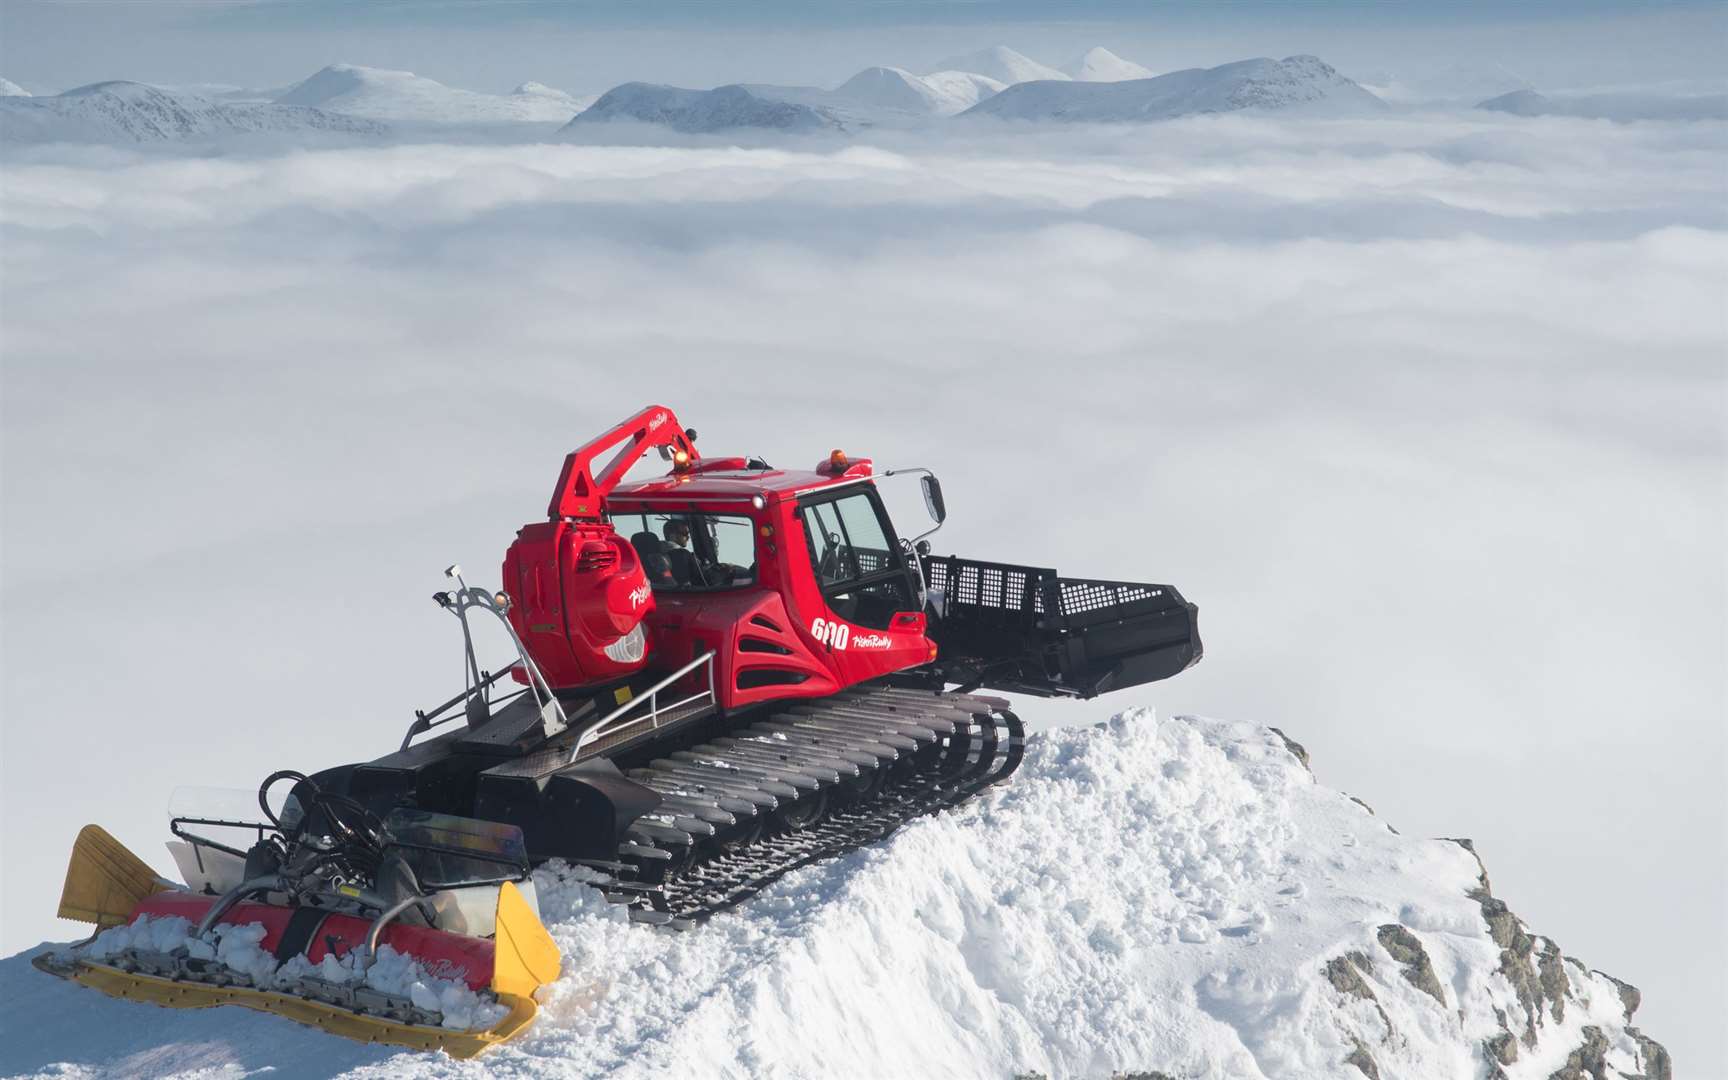 Skiing with a view – a piste-beater parked at the top of Glencoe Mountain Resort. Picture: Steve McKenna